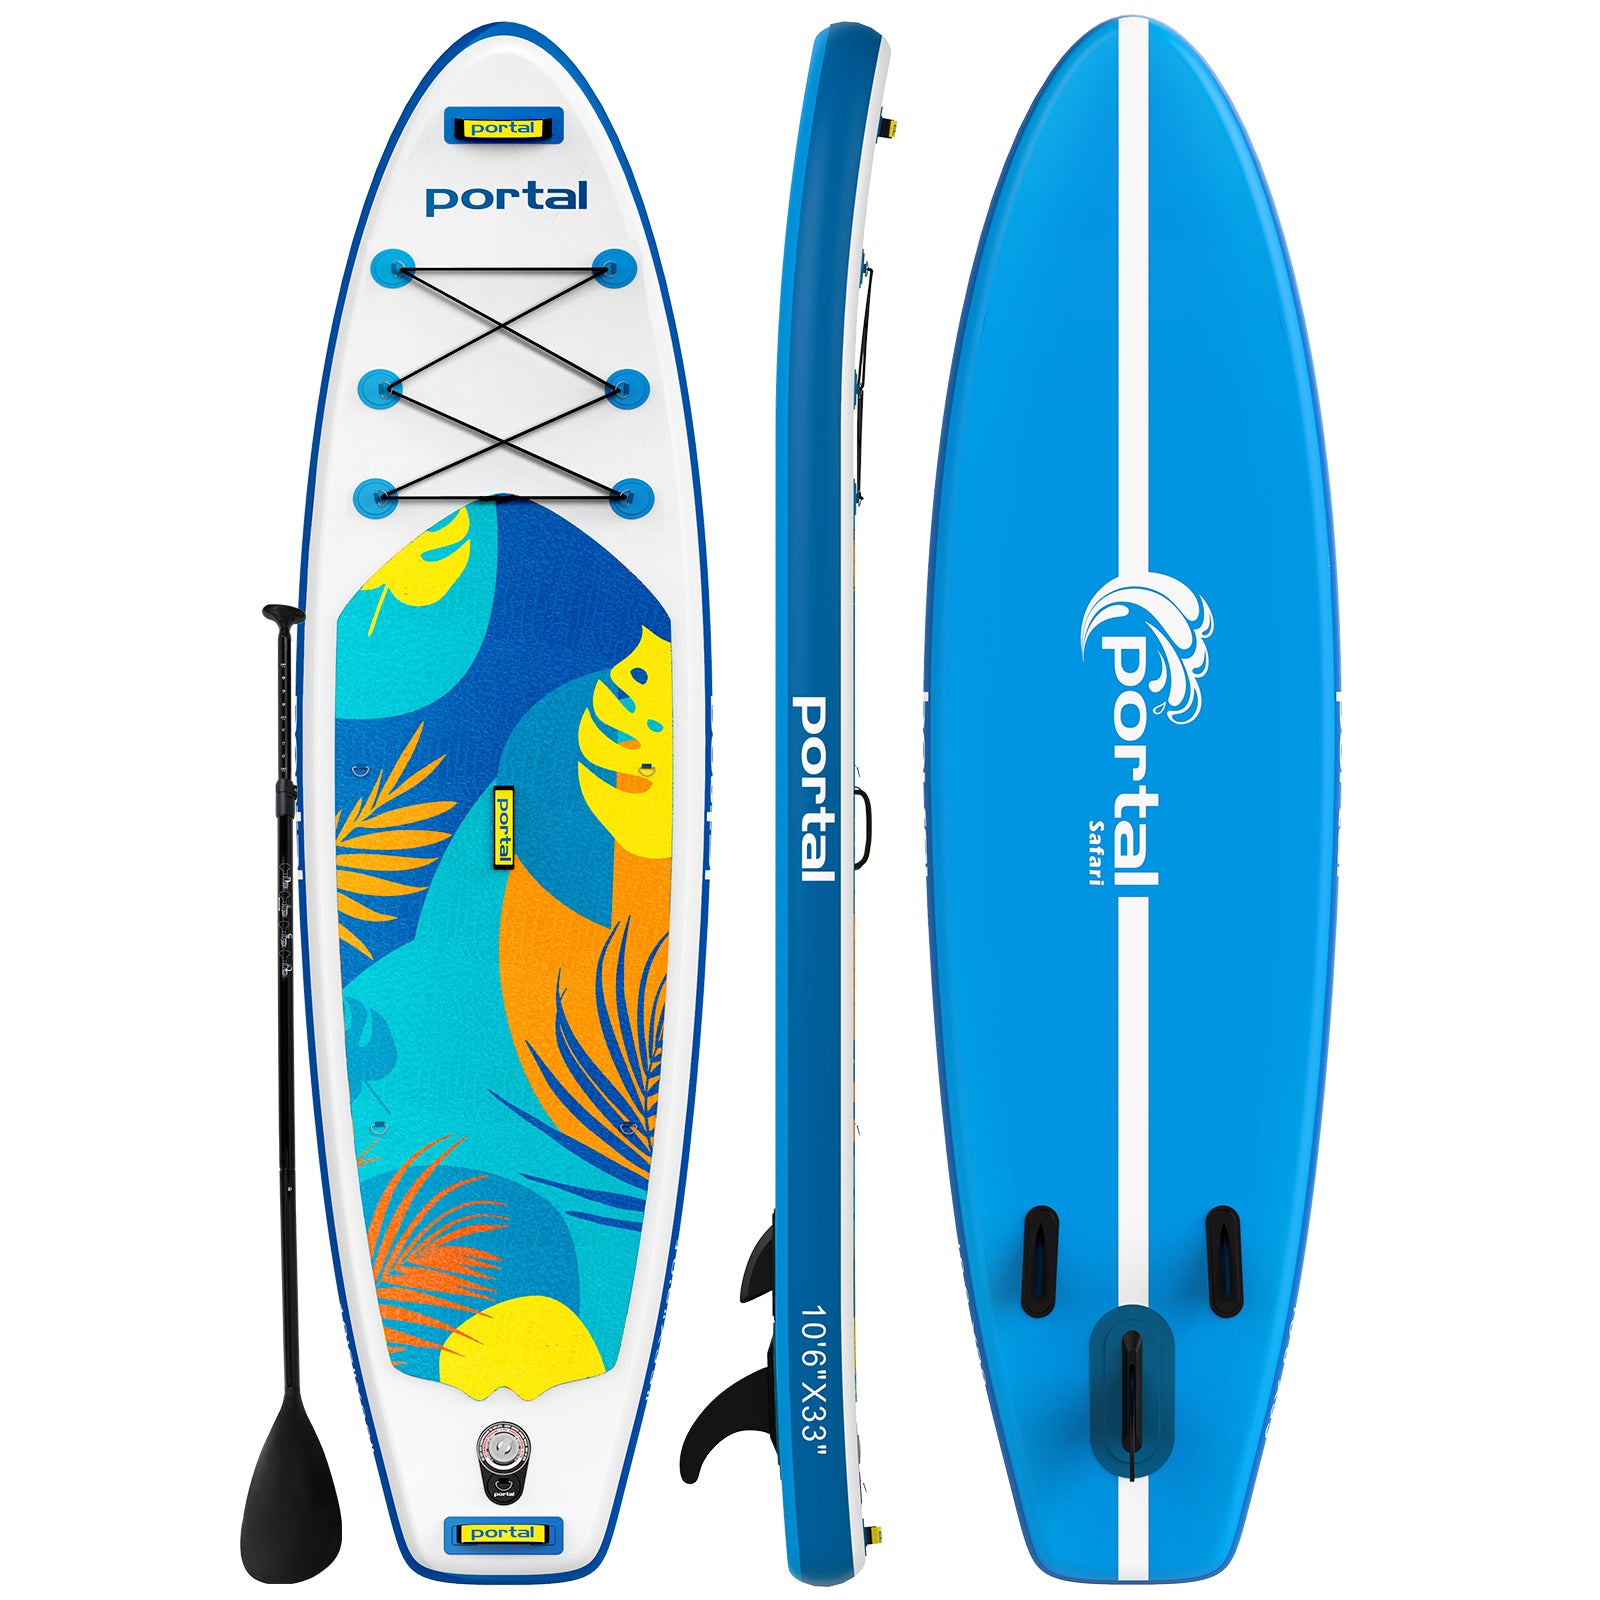 Portal Outdoors Safari Inflatable Stand Up Paddle Board 10'6"x33"x6"